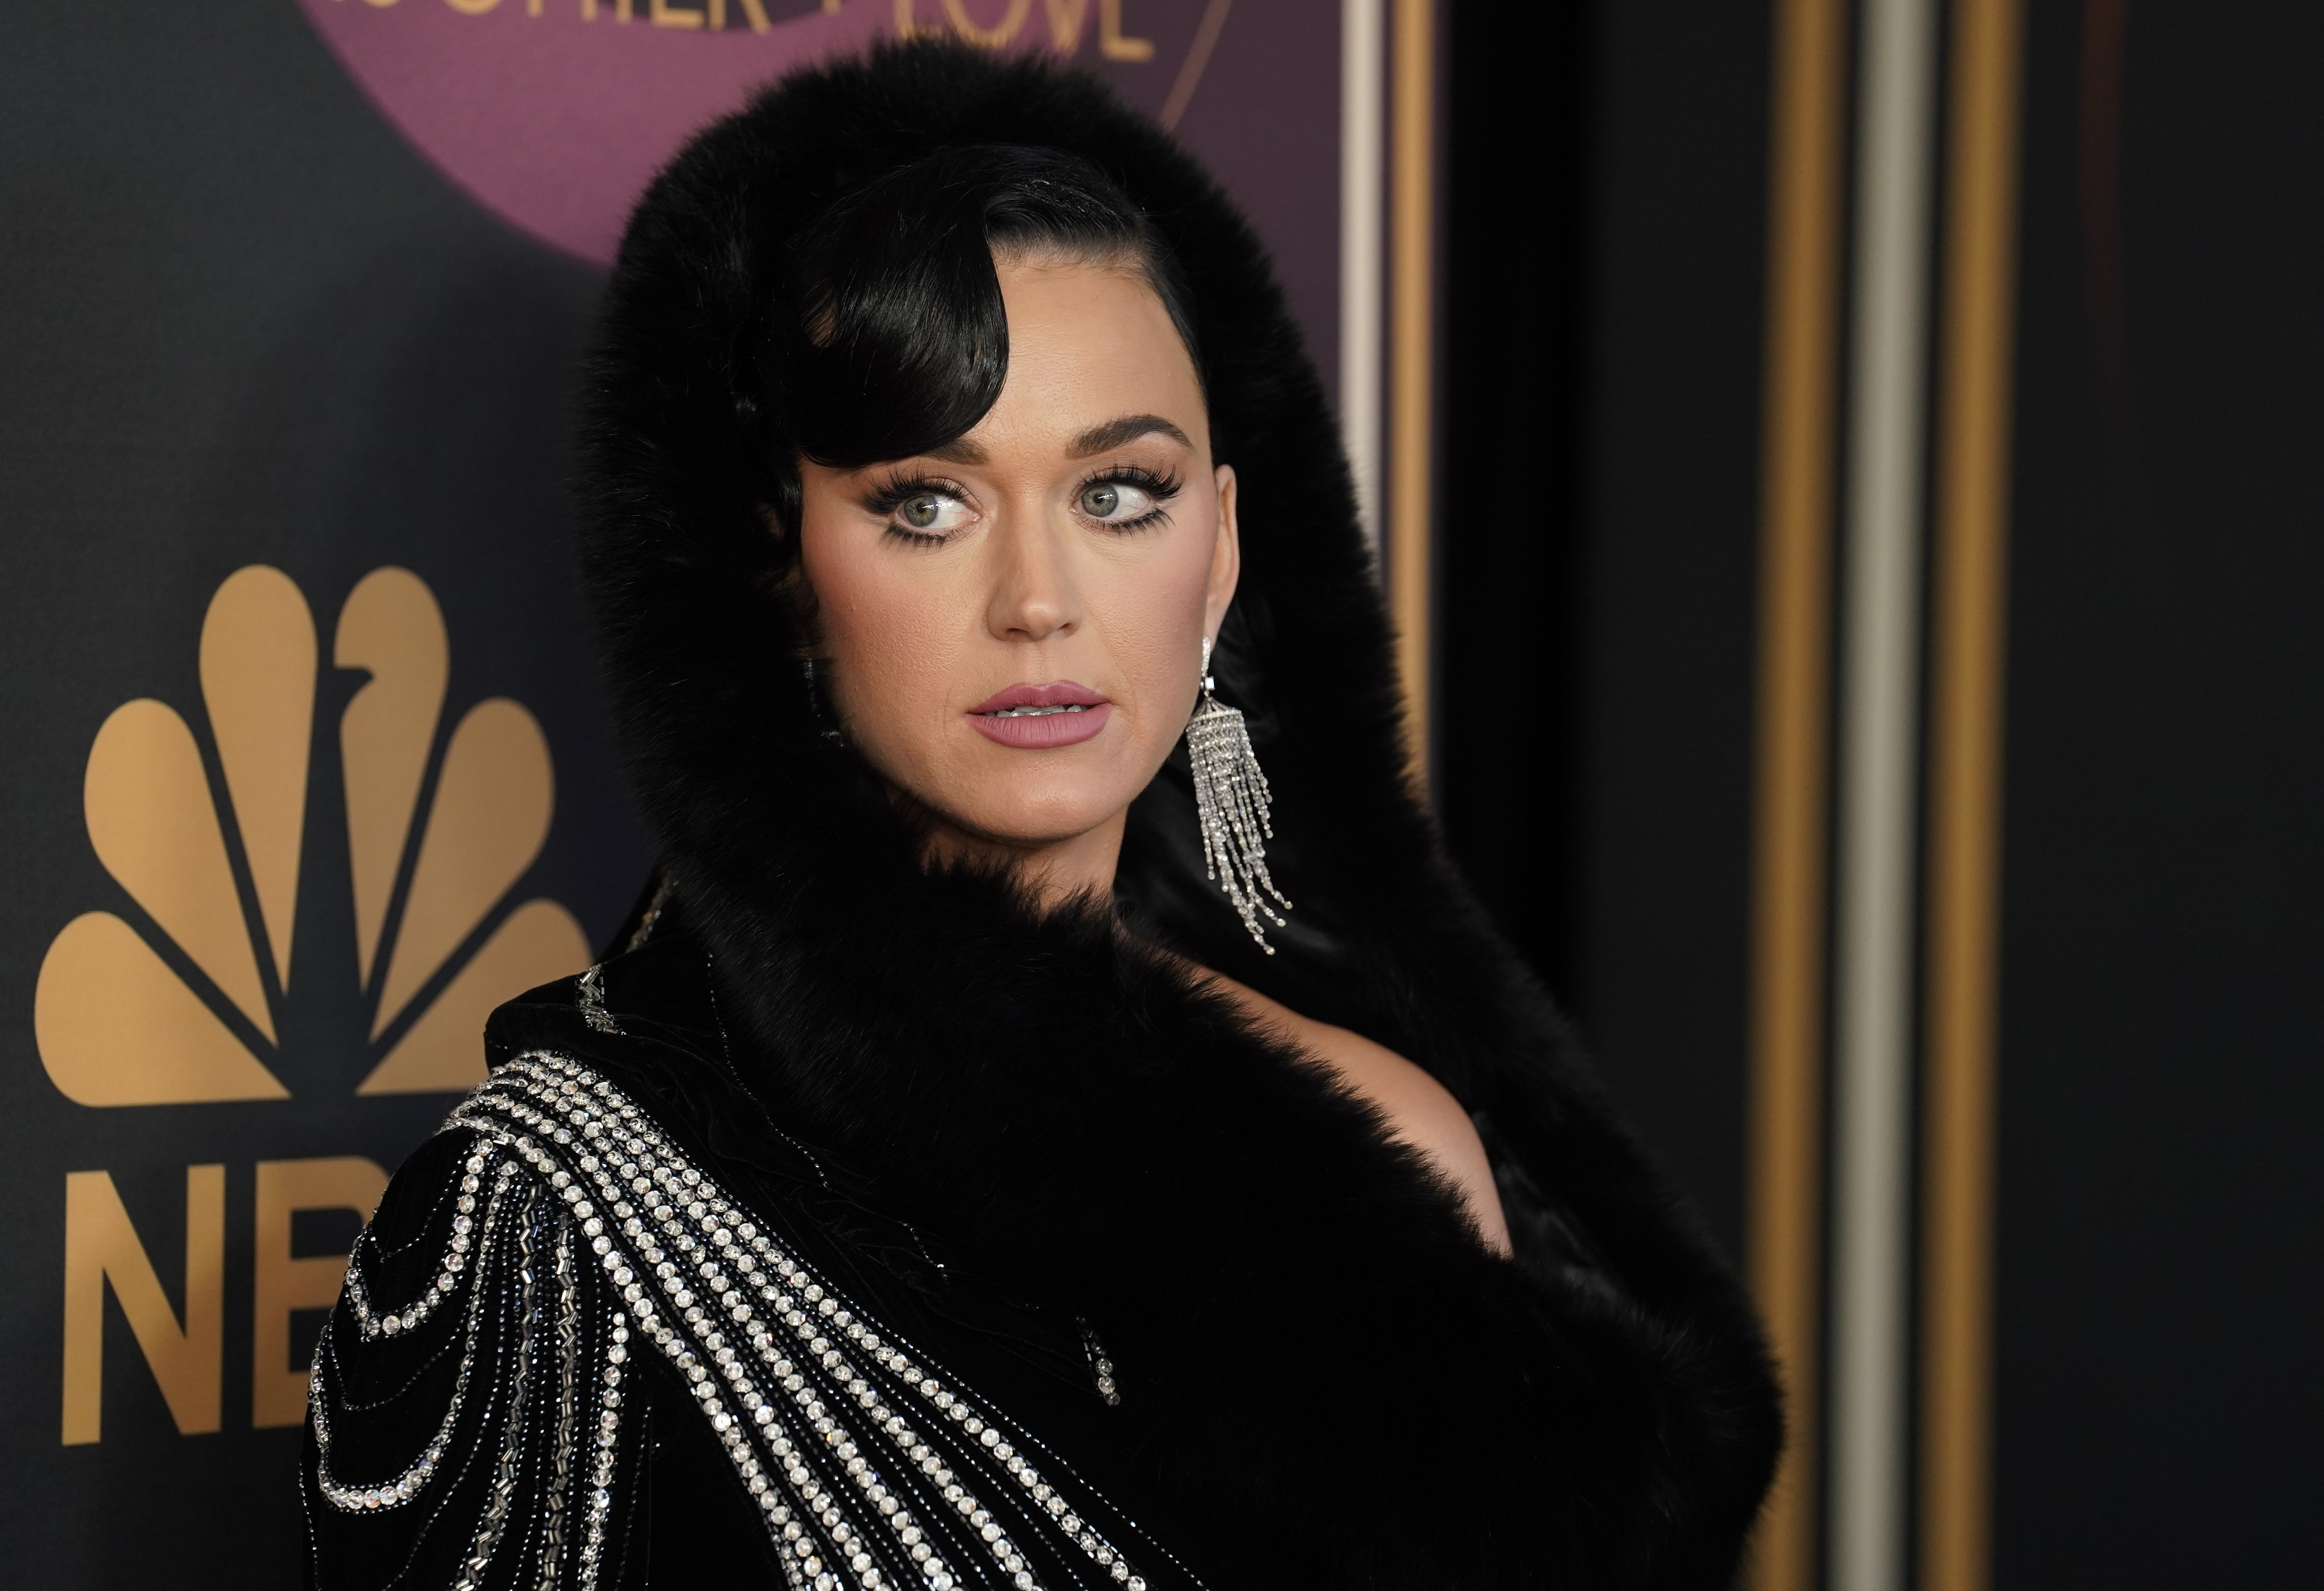 Katy Perry v Katie Perry: Singer loses trademark battle - BBC News